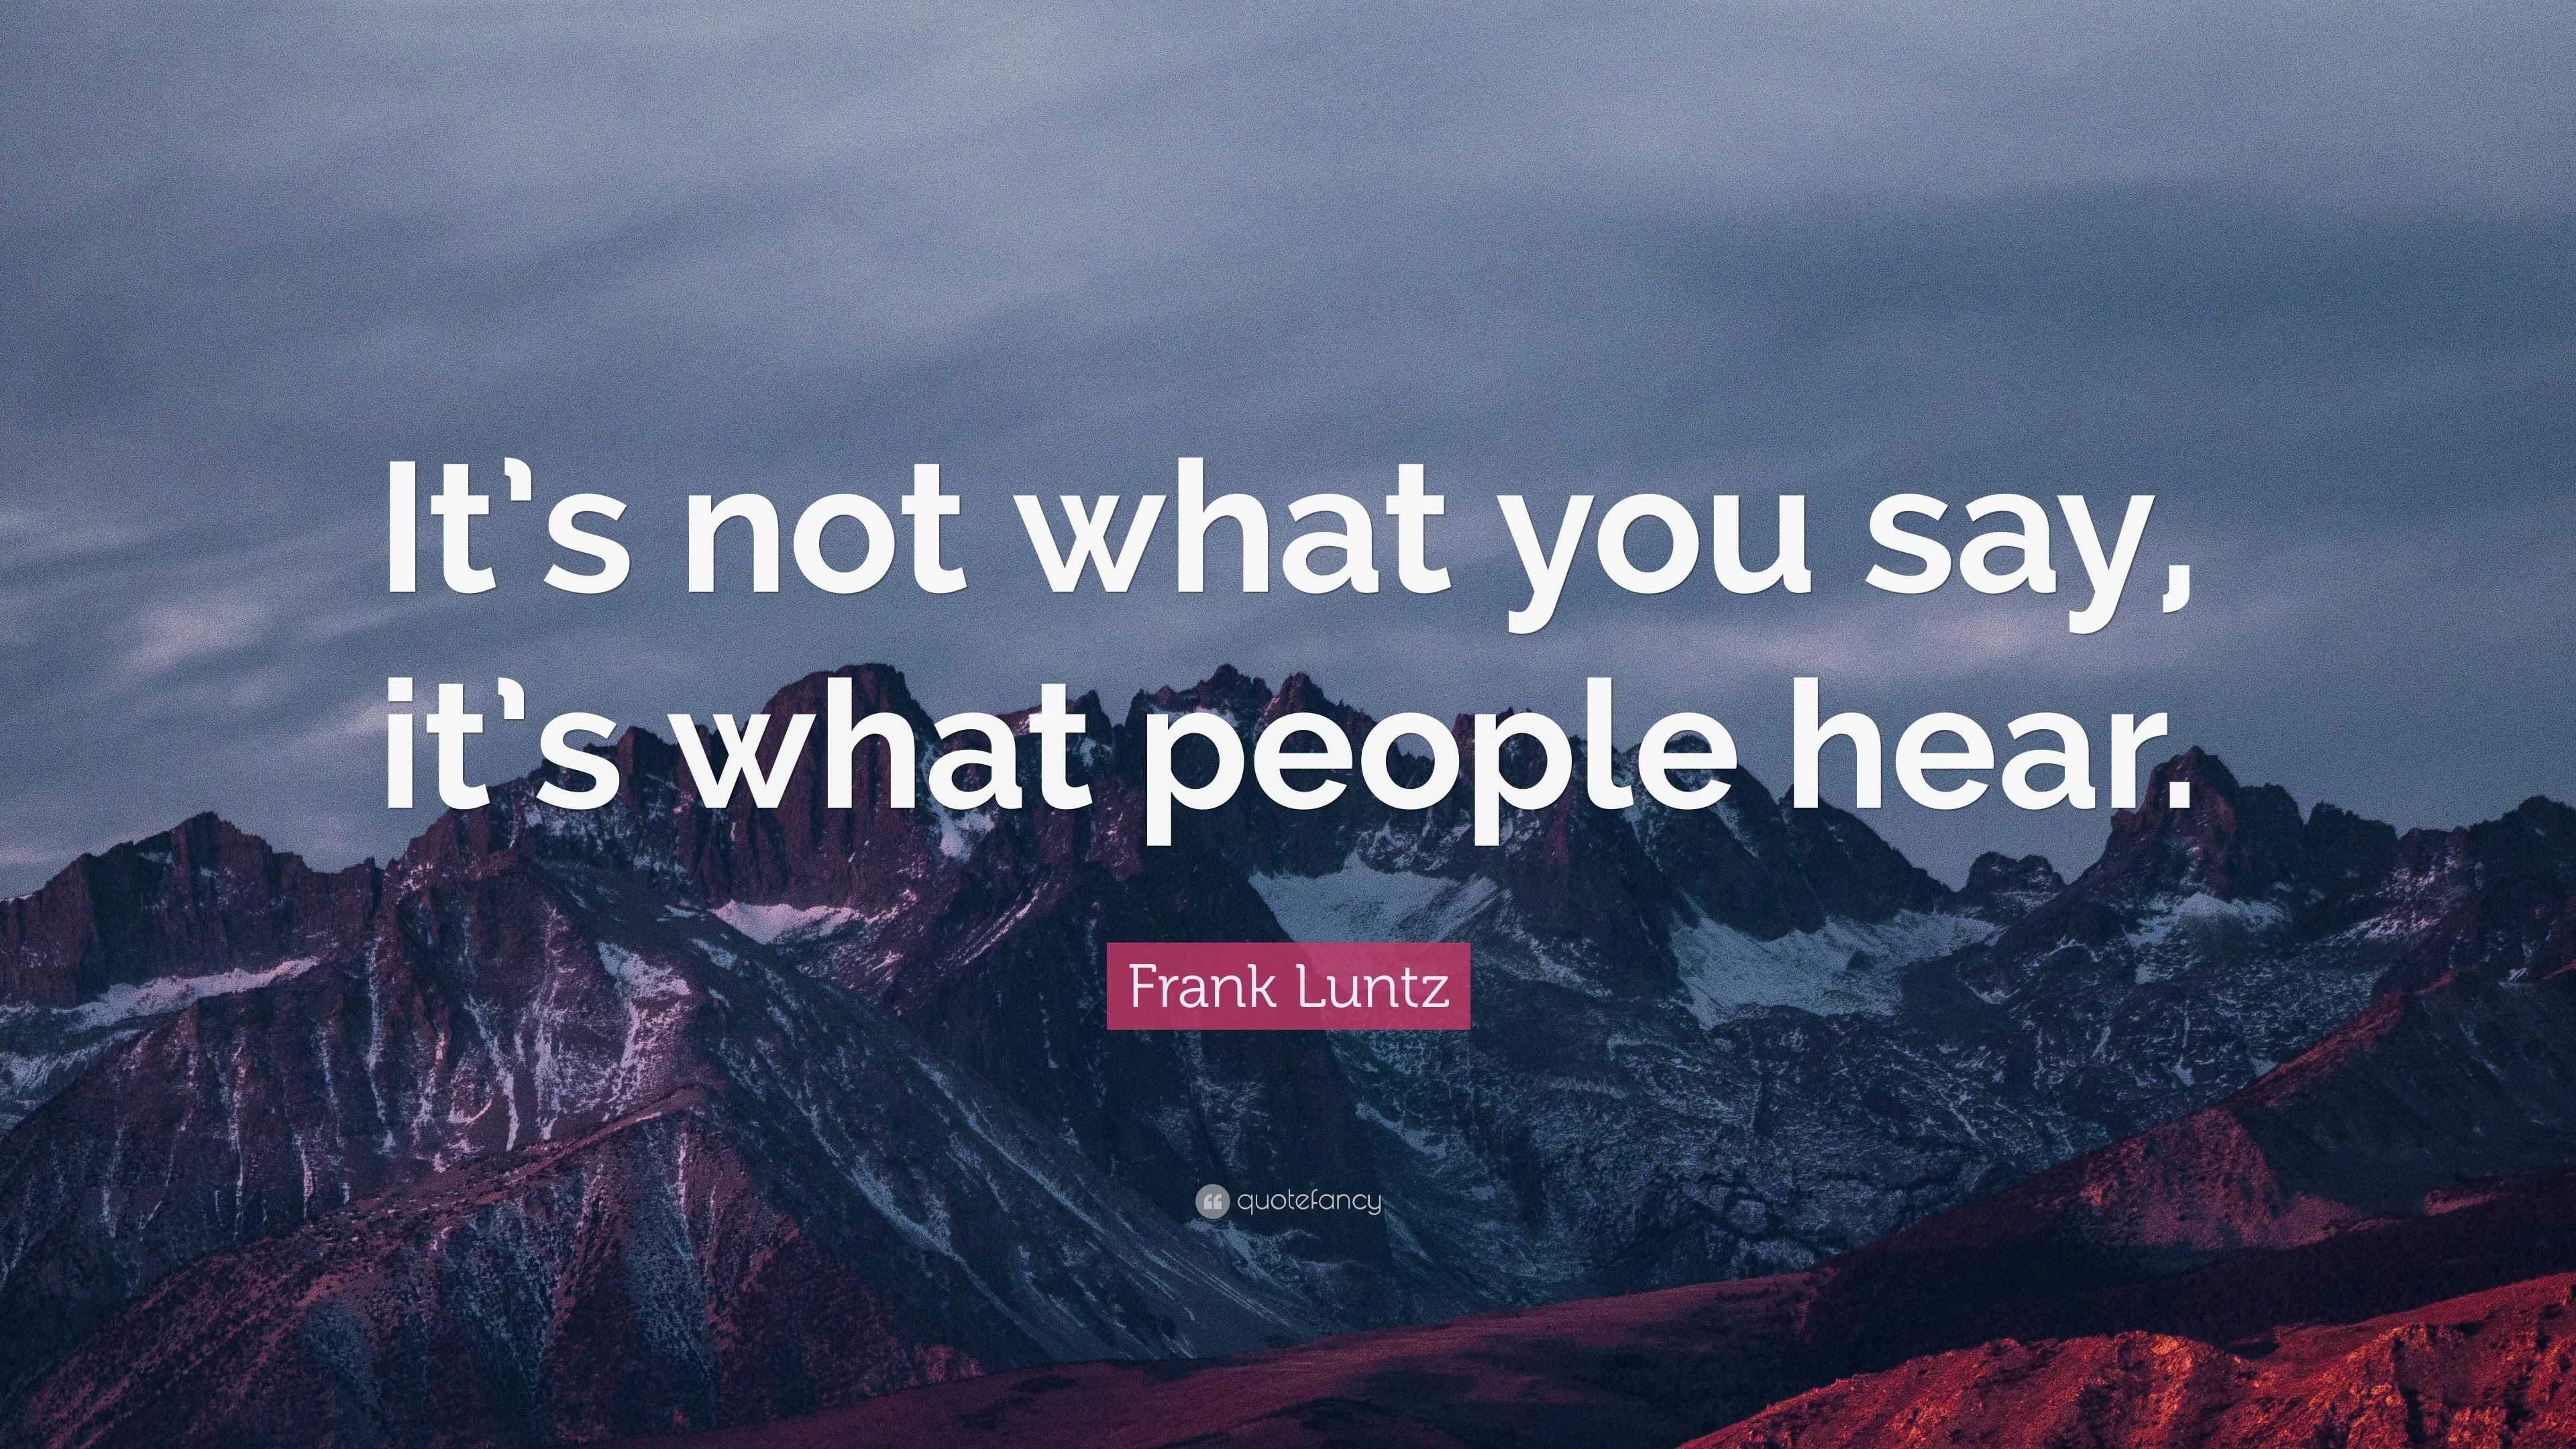 Frank Luntz Quote: “It’s not what you say, it’s what people hear.”